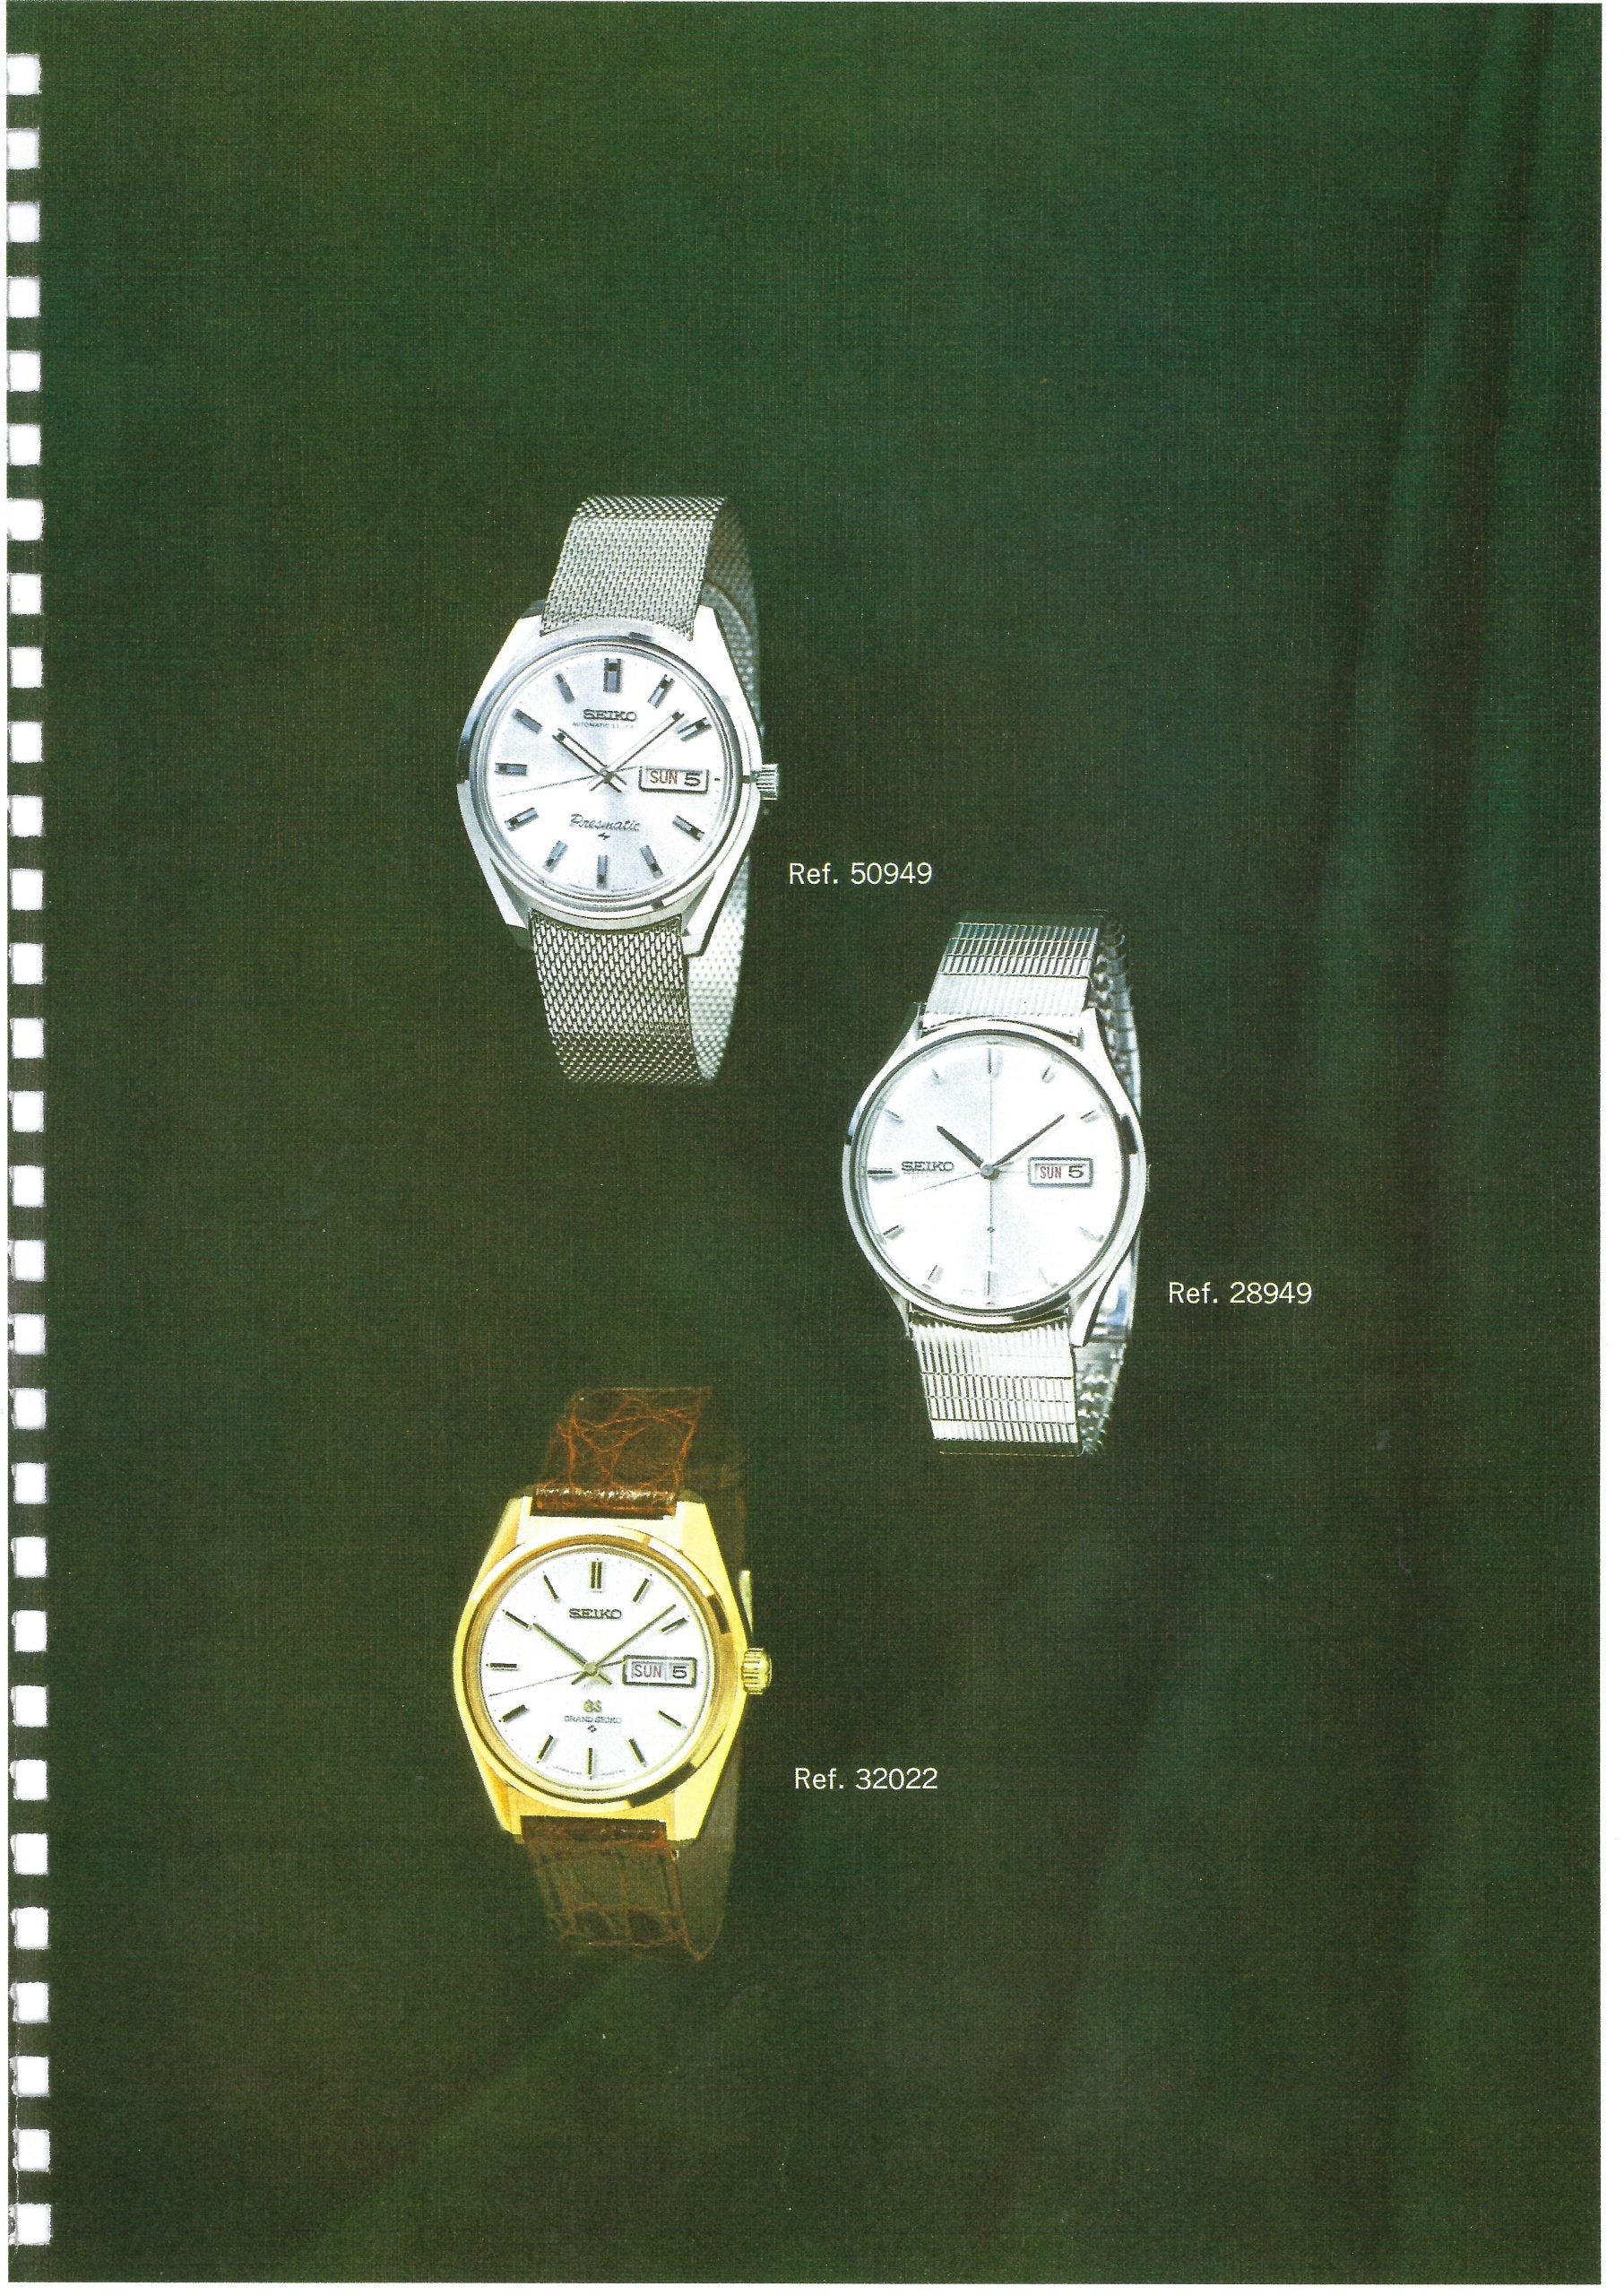 Vintage Grand Seiko models appearing in the Seiko export catalogues